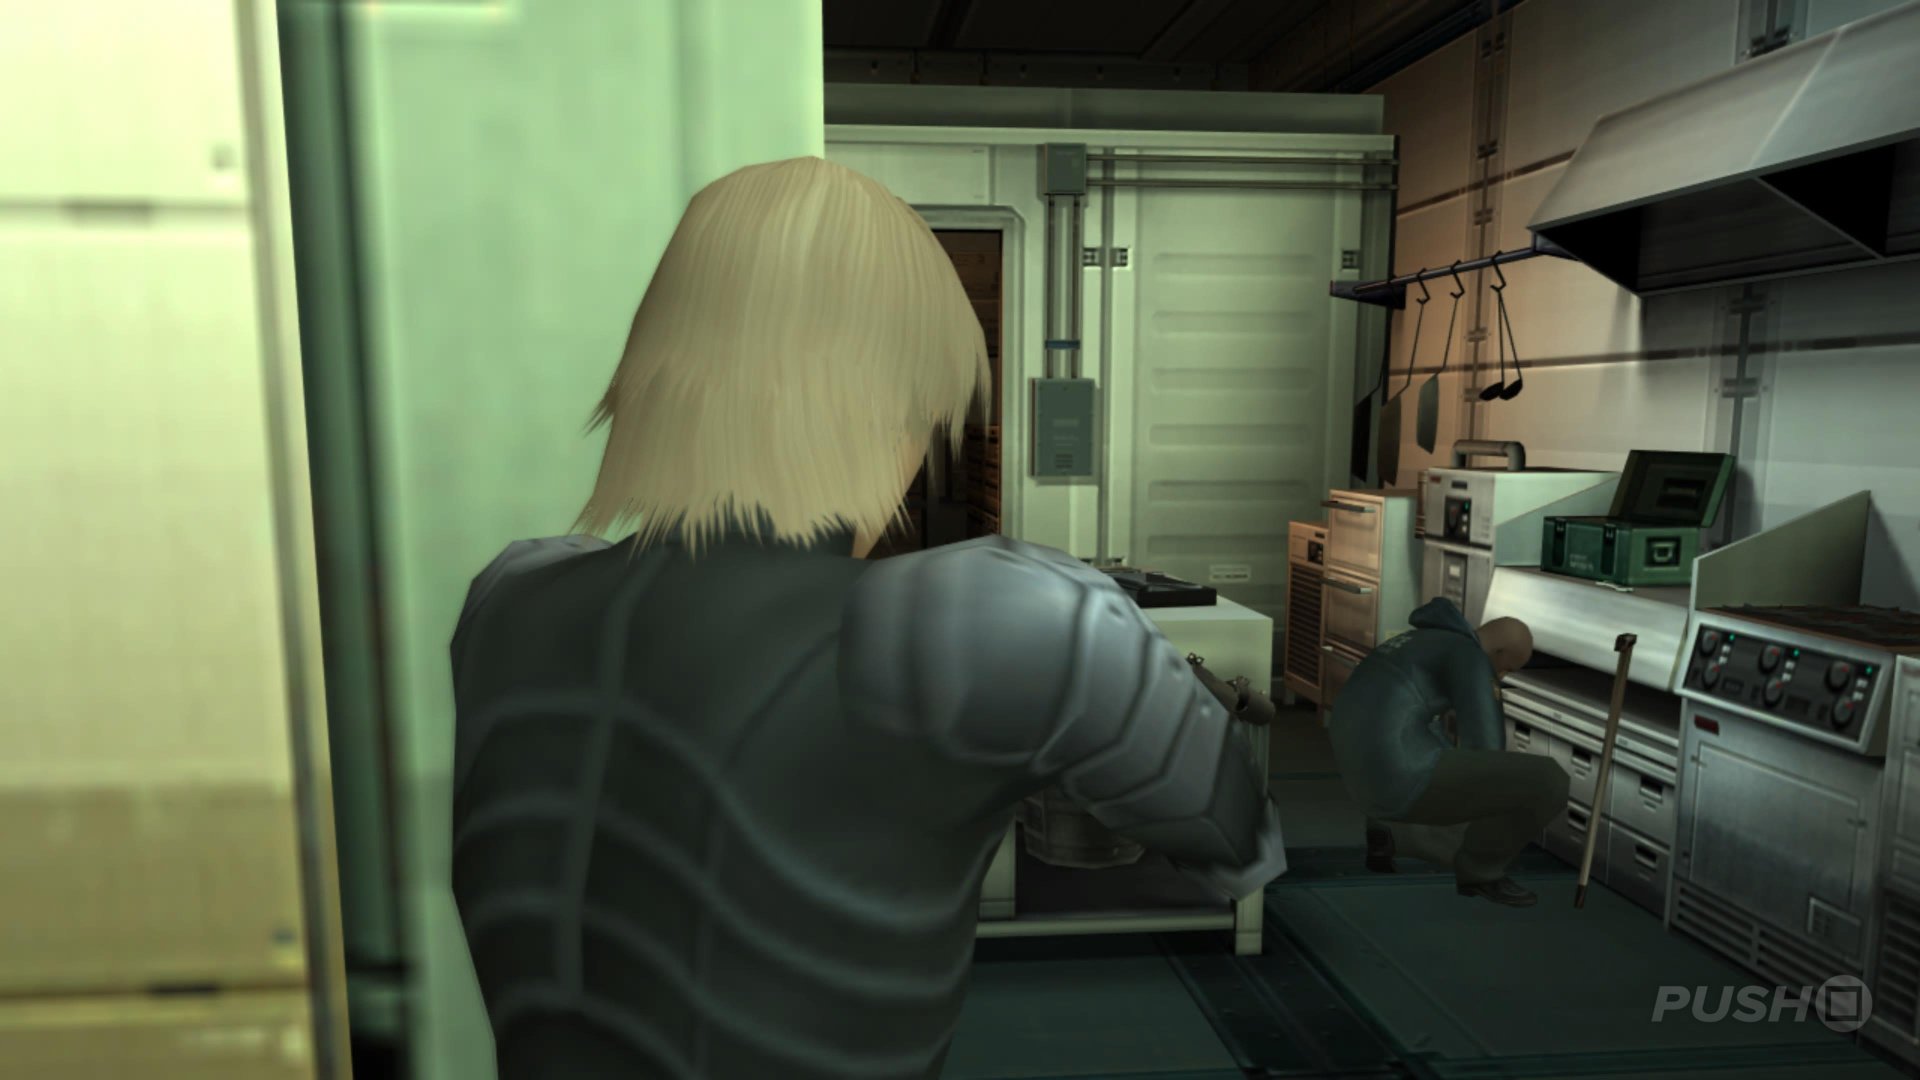 Metal Gear Solid: Master Collection Vol.1 (2023) - MobyGames